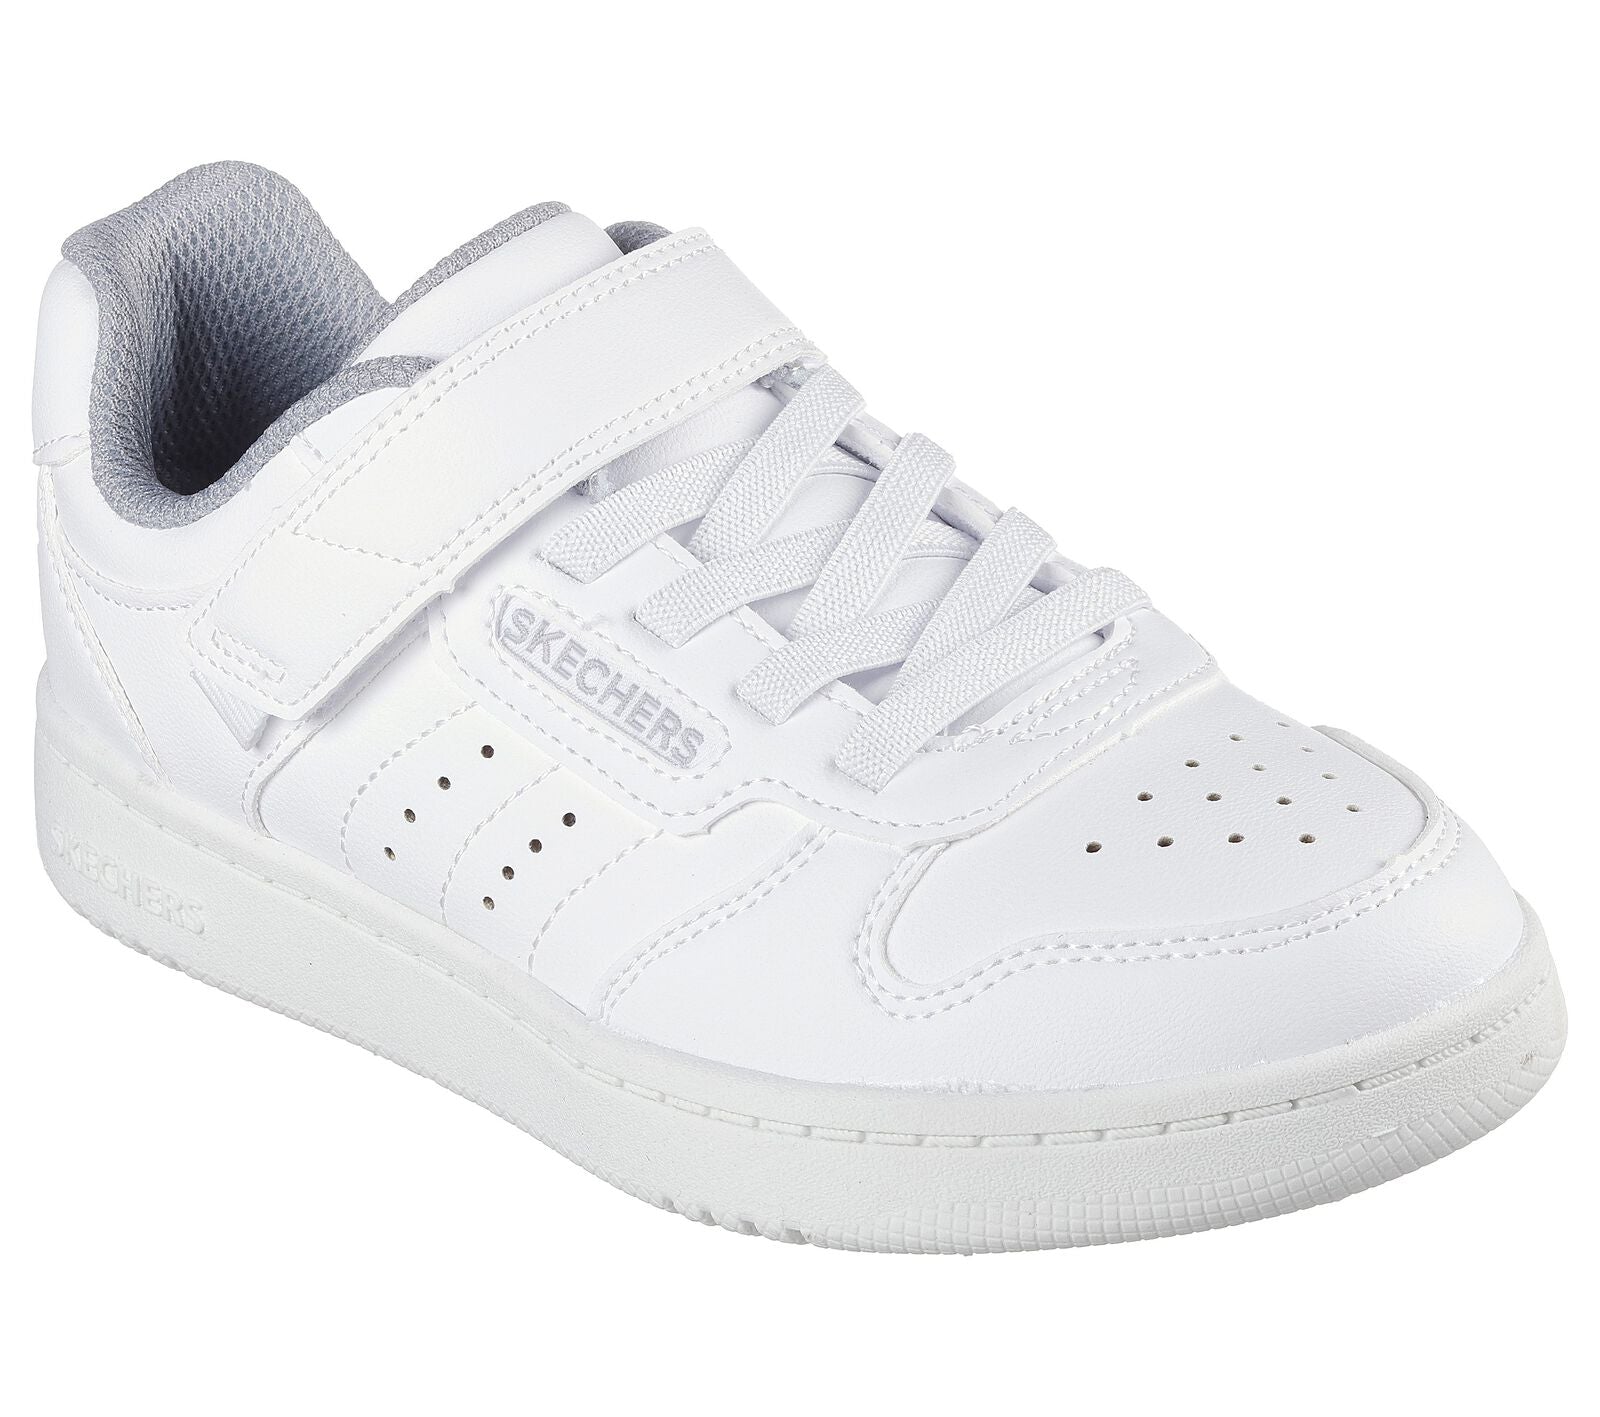 Skechers Quick Street, a sporty white trainer with grey lining, featuring the Skechers logo. Velcro fastening with flat stretch bungee laces. Right angled view.